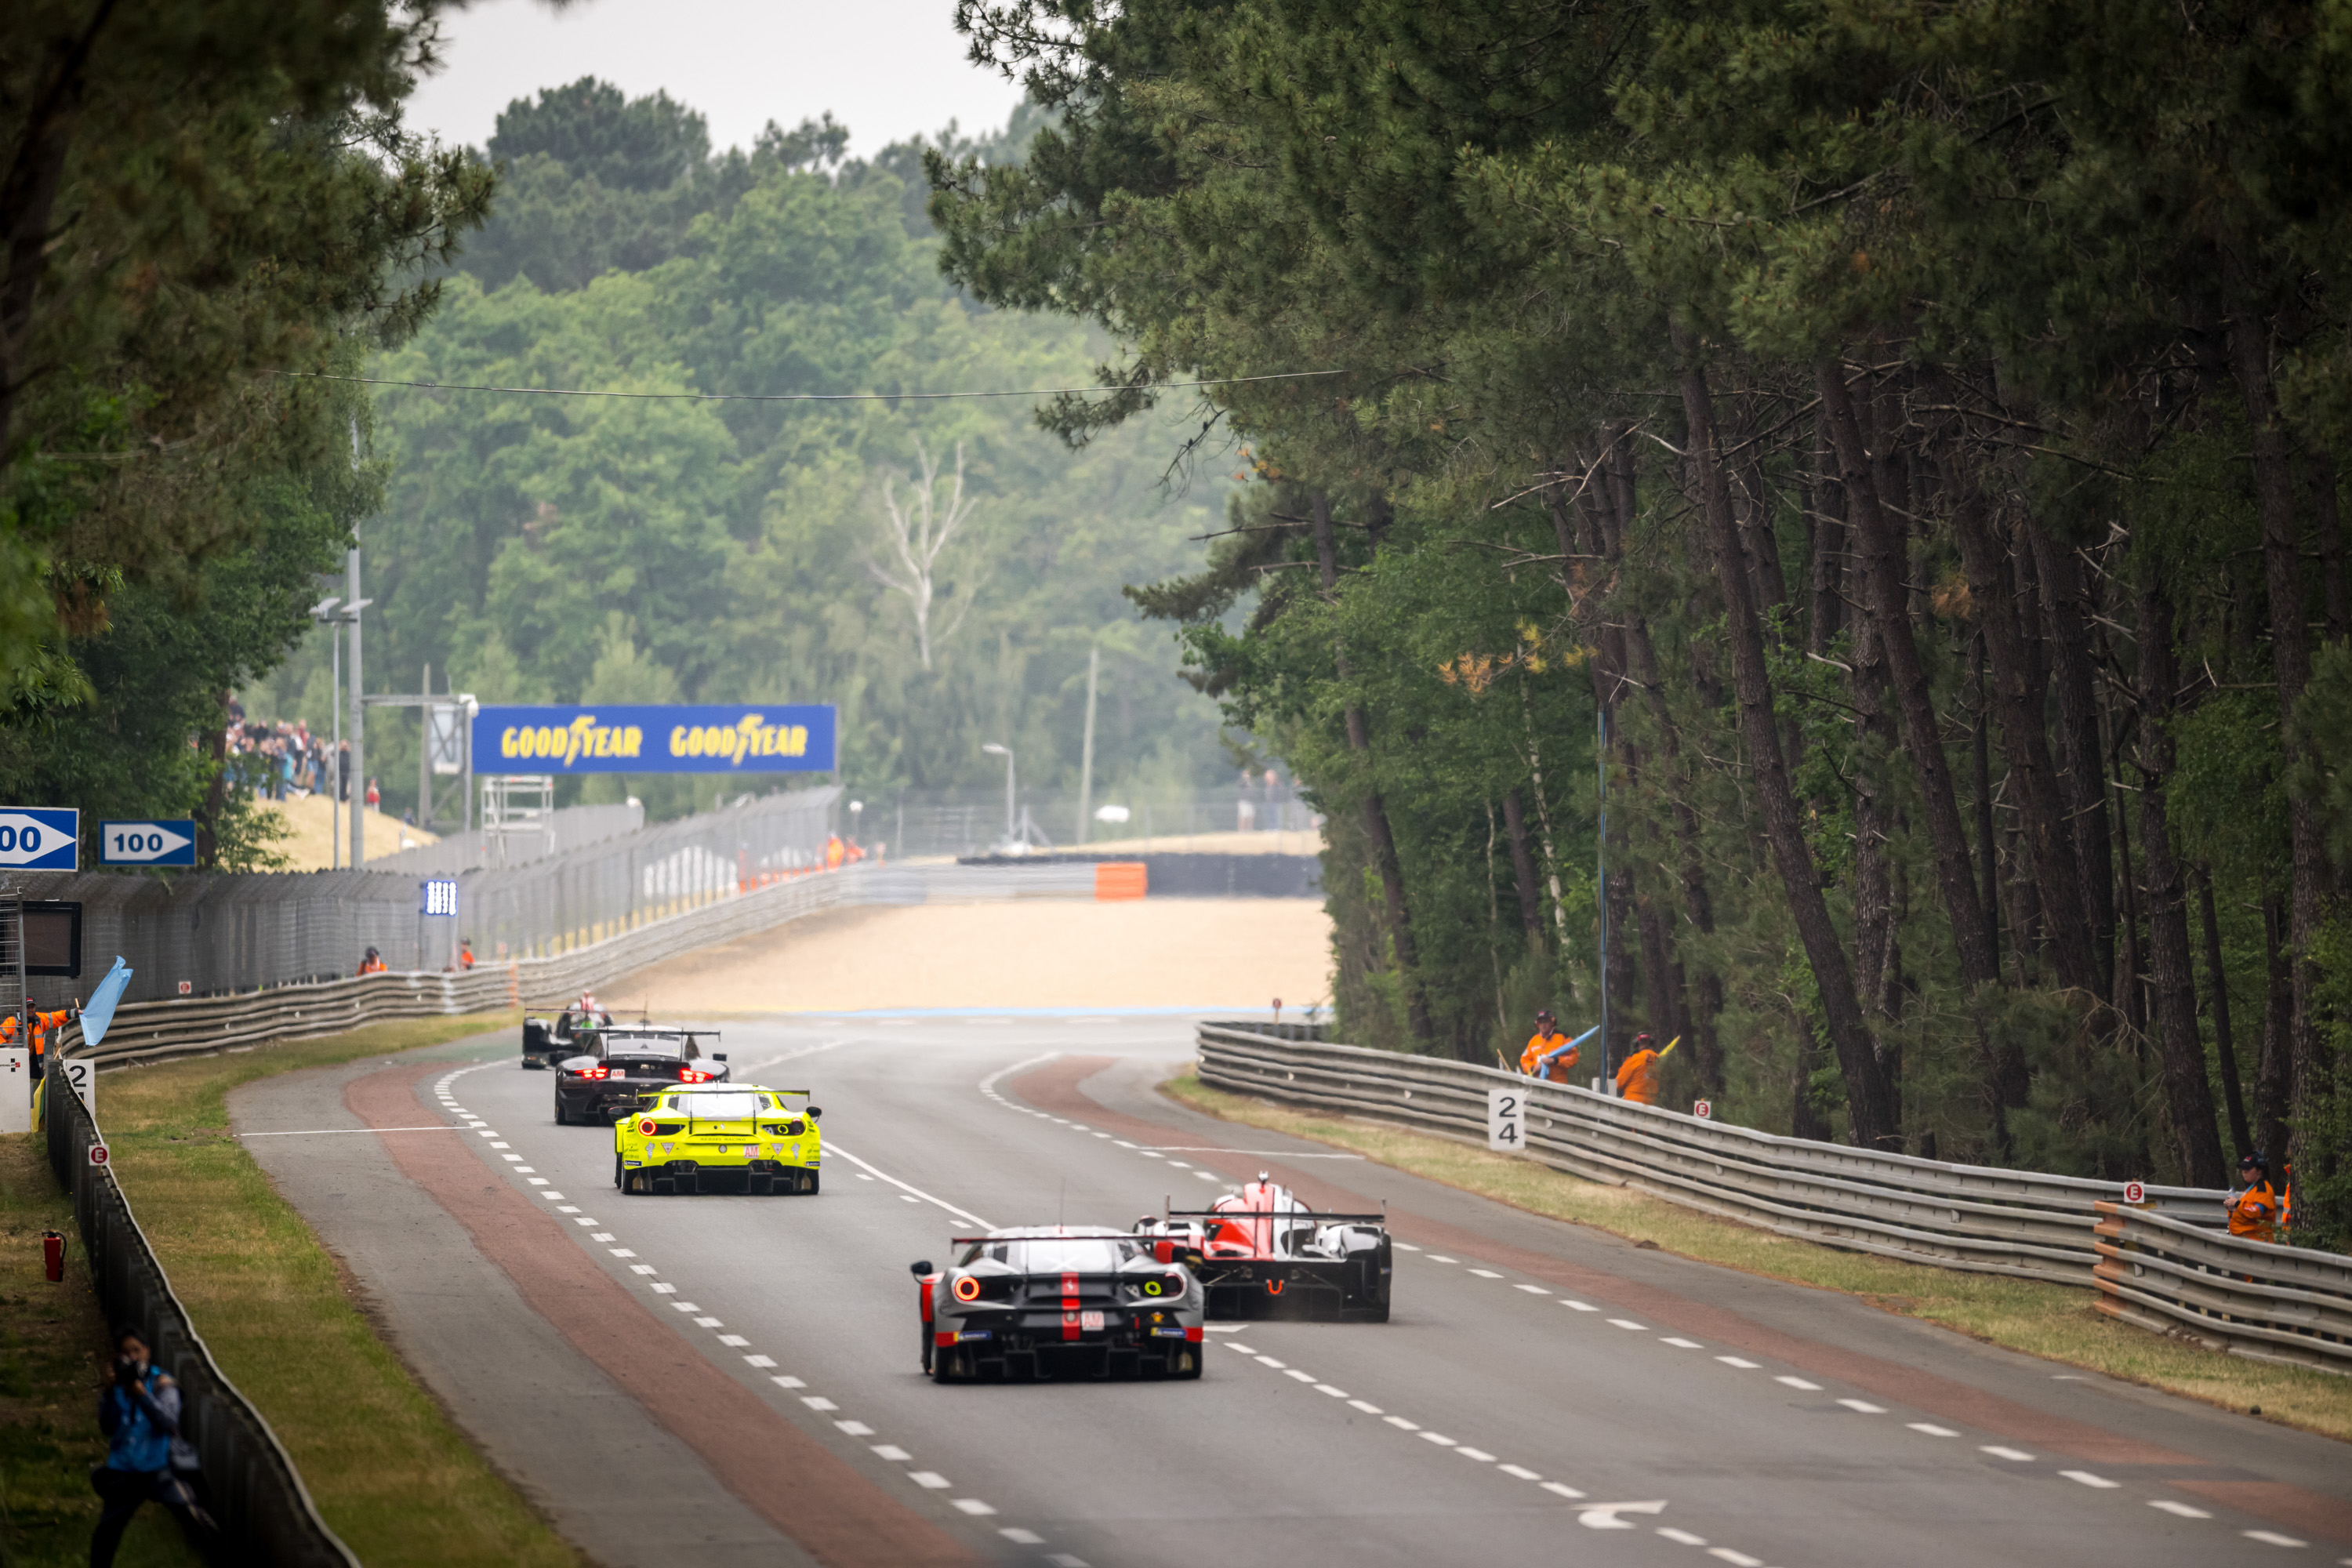 WEC Full Access from 24 Hours of Le Mans now available